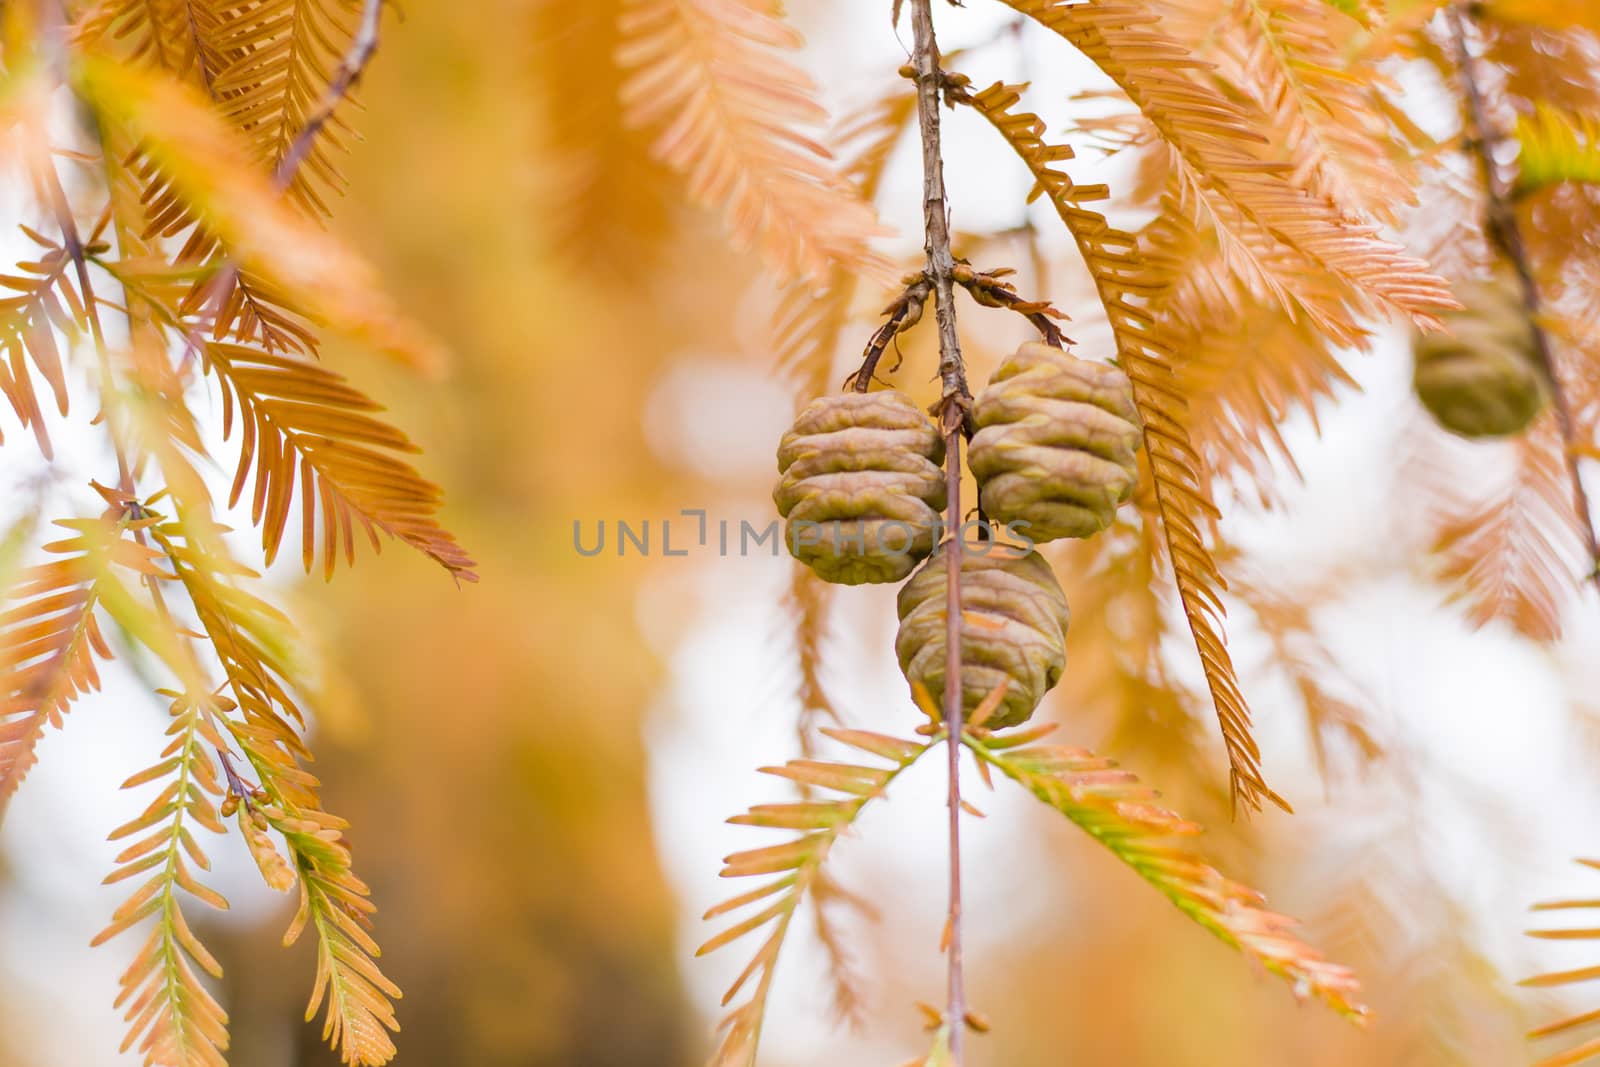 Metasequoia glyptostroboides tree, autumn and fall tree close-up in Tsinandali by Taidundua